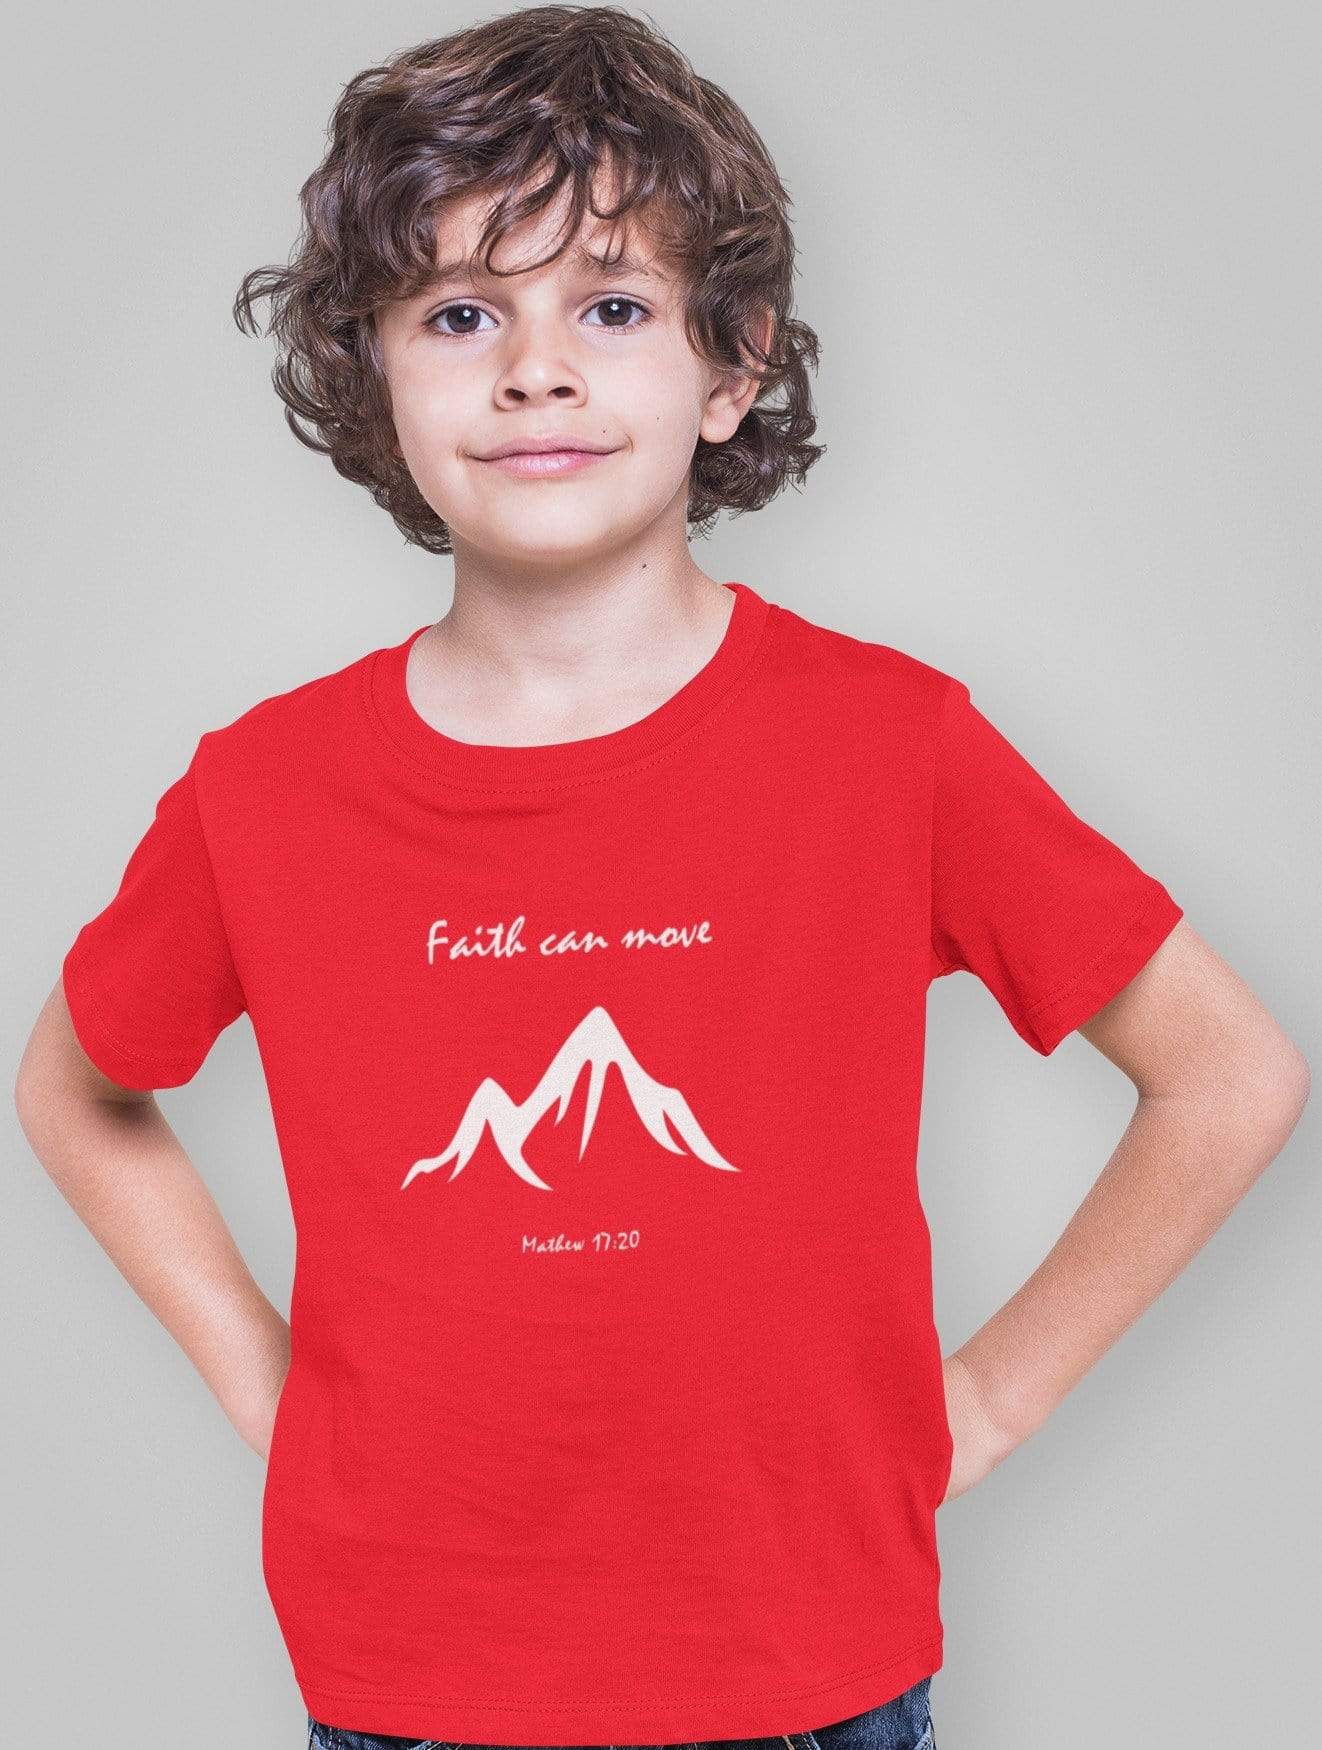 Living Words Kids Round Neck T Shirt Boy / 0-12 Mn / Red Faith can move